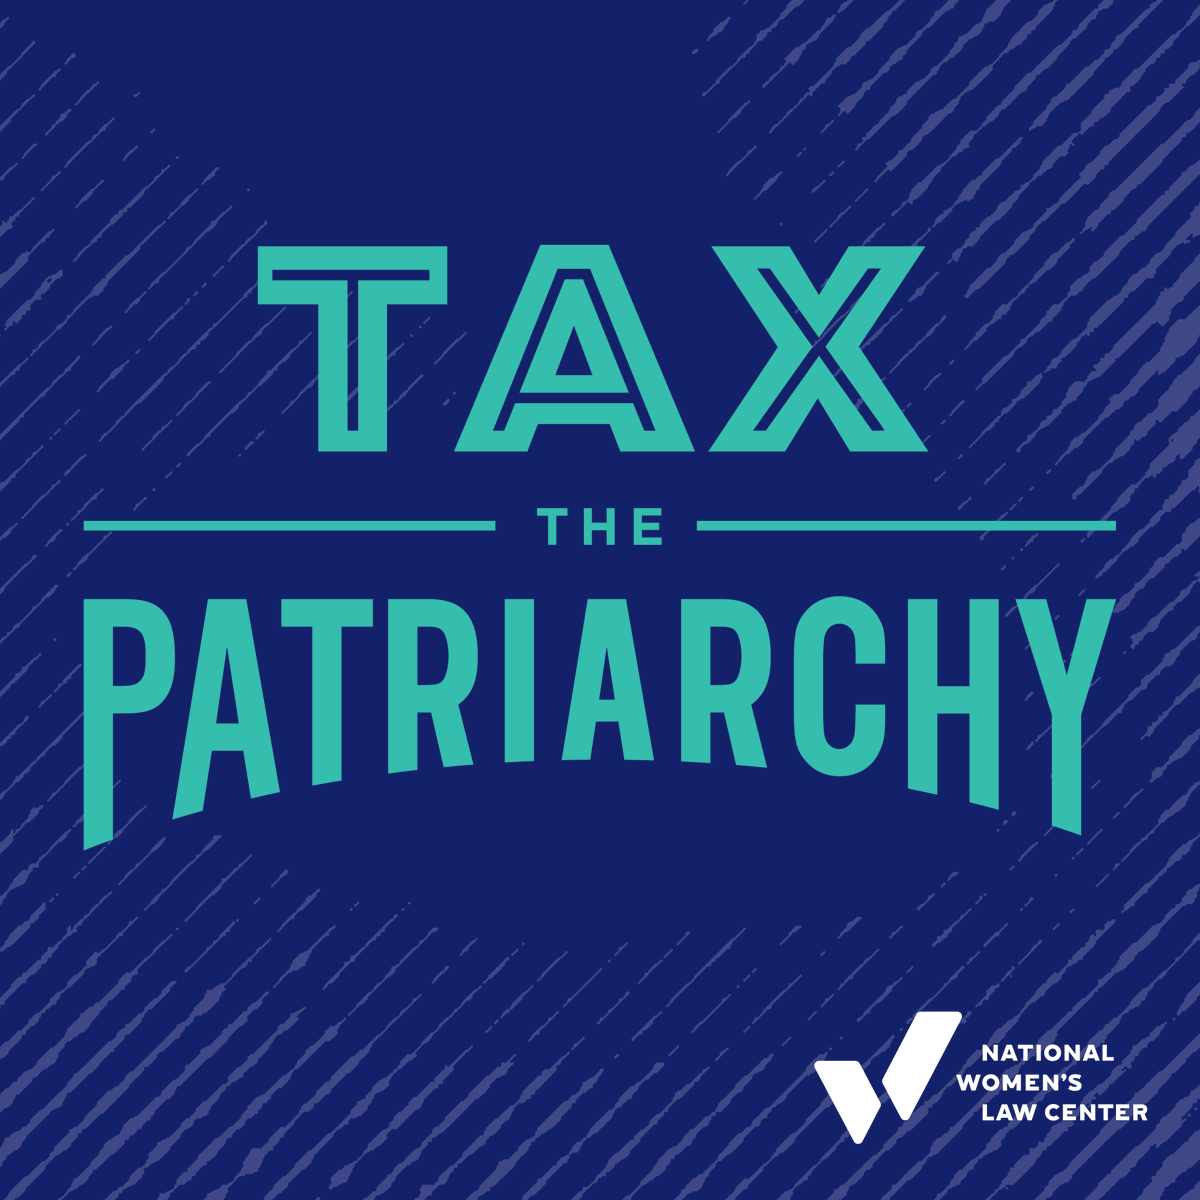 2/ If you care abt gender equality (that's you!), it’s time to talk taxes. f you’re a tax wonk, it’s PAST time to reckon w/gender & racial bias in the tax code & who is (not) at the table.Keep reading to learn how we